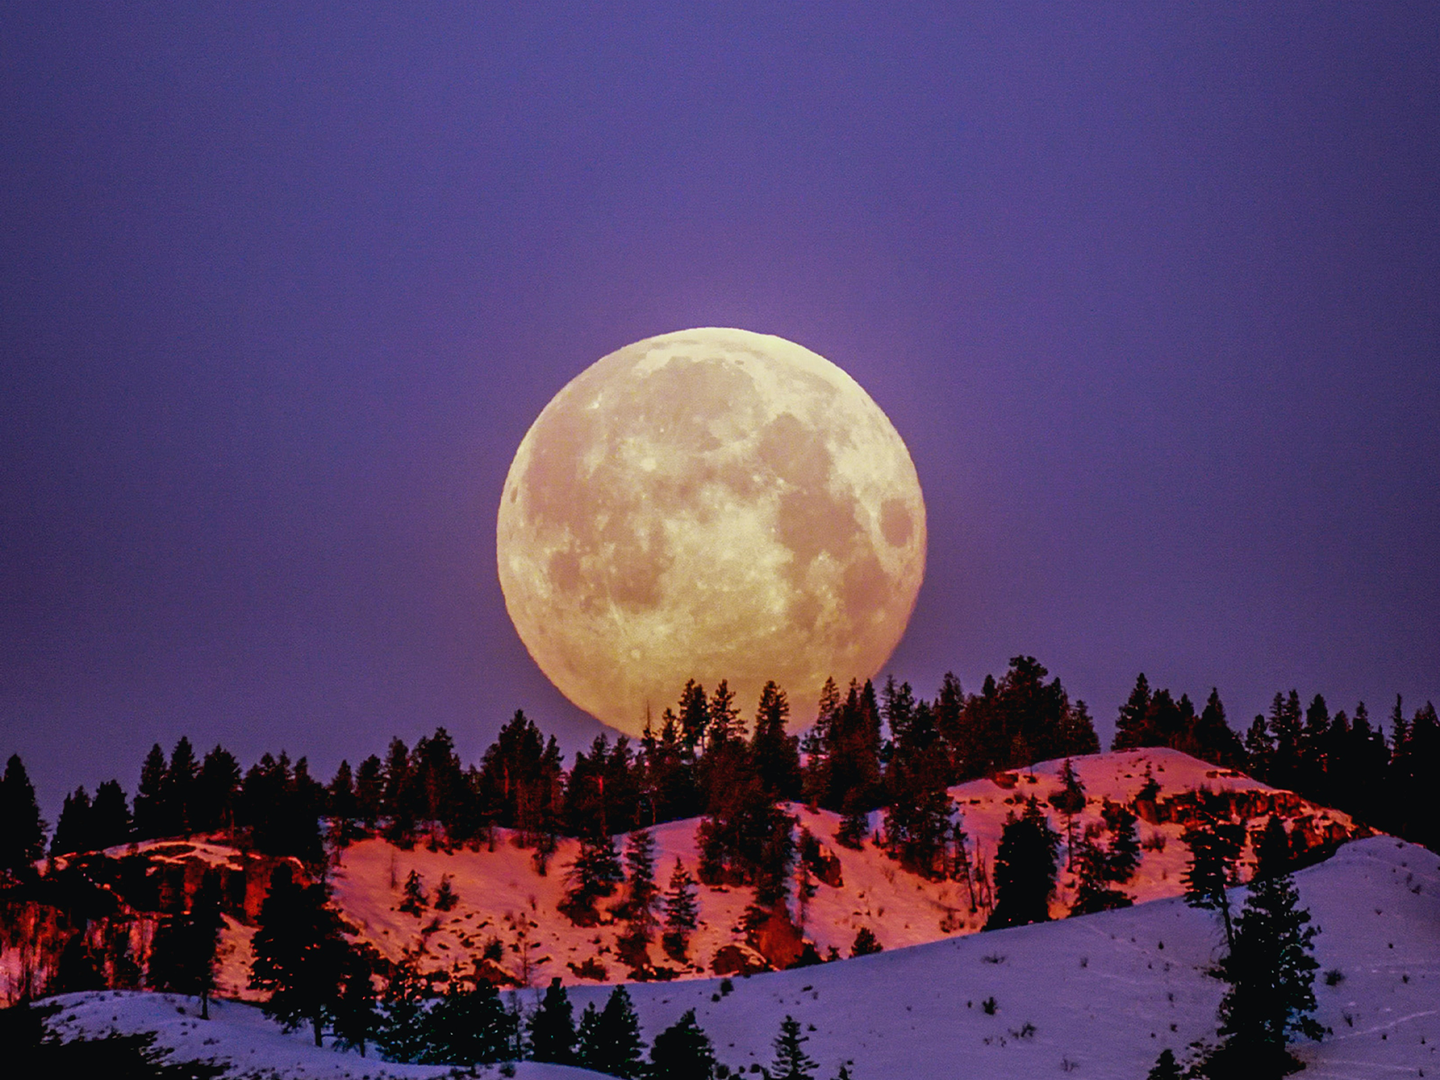 A full moon rises over snowy hills.